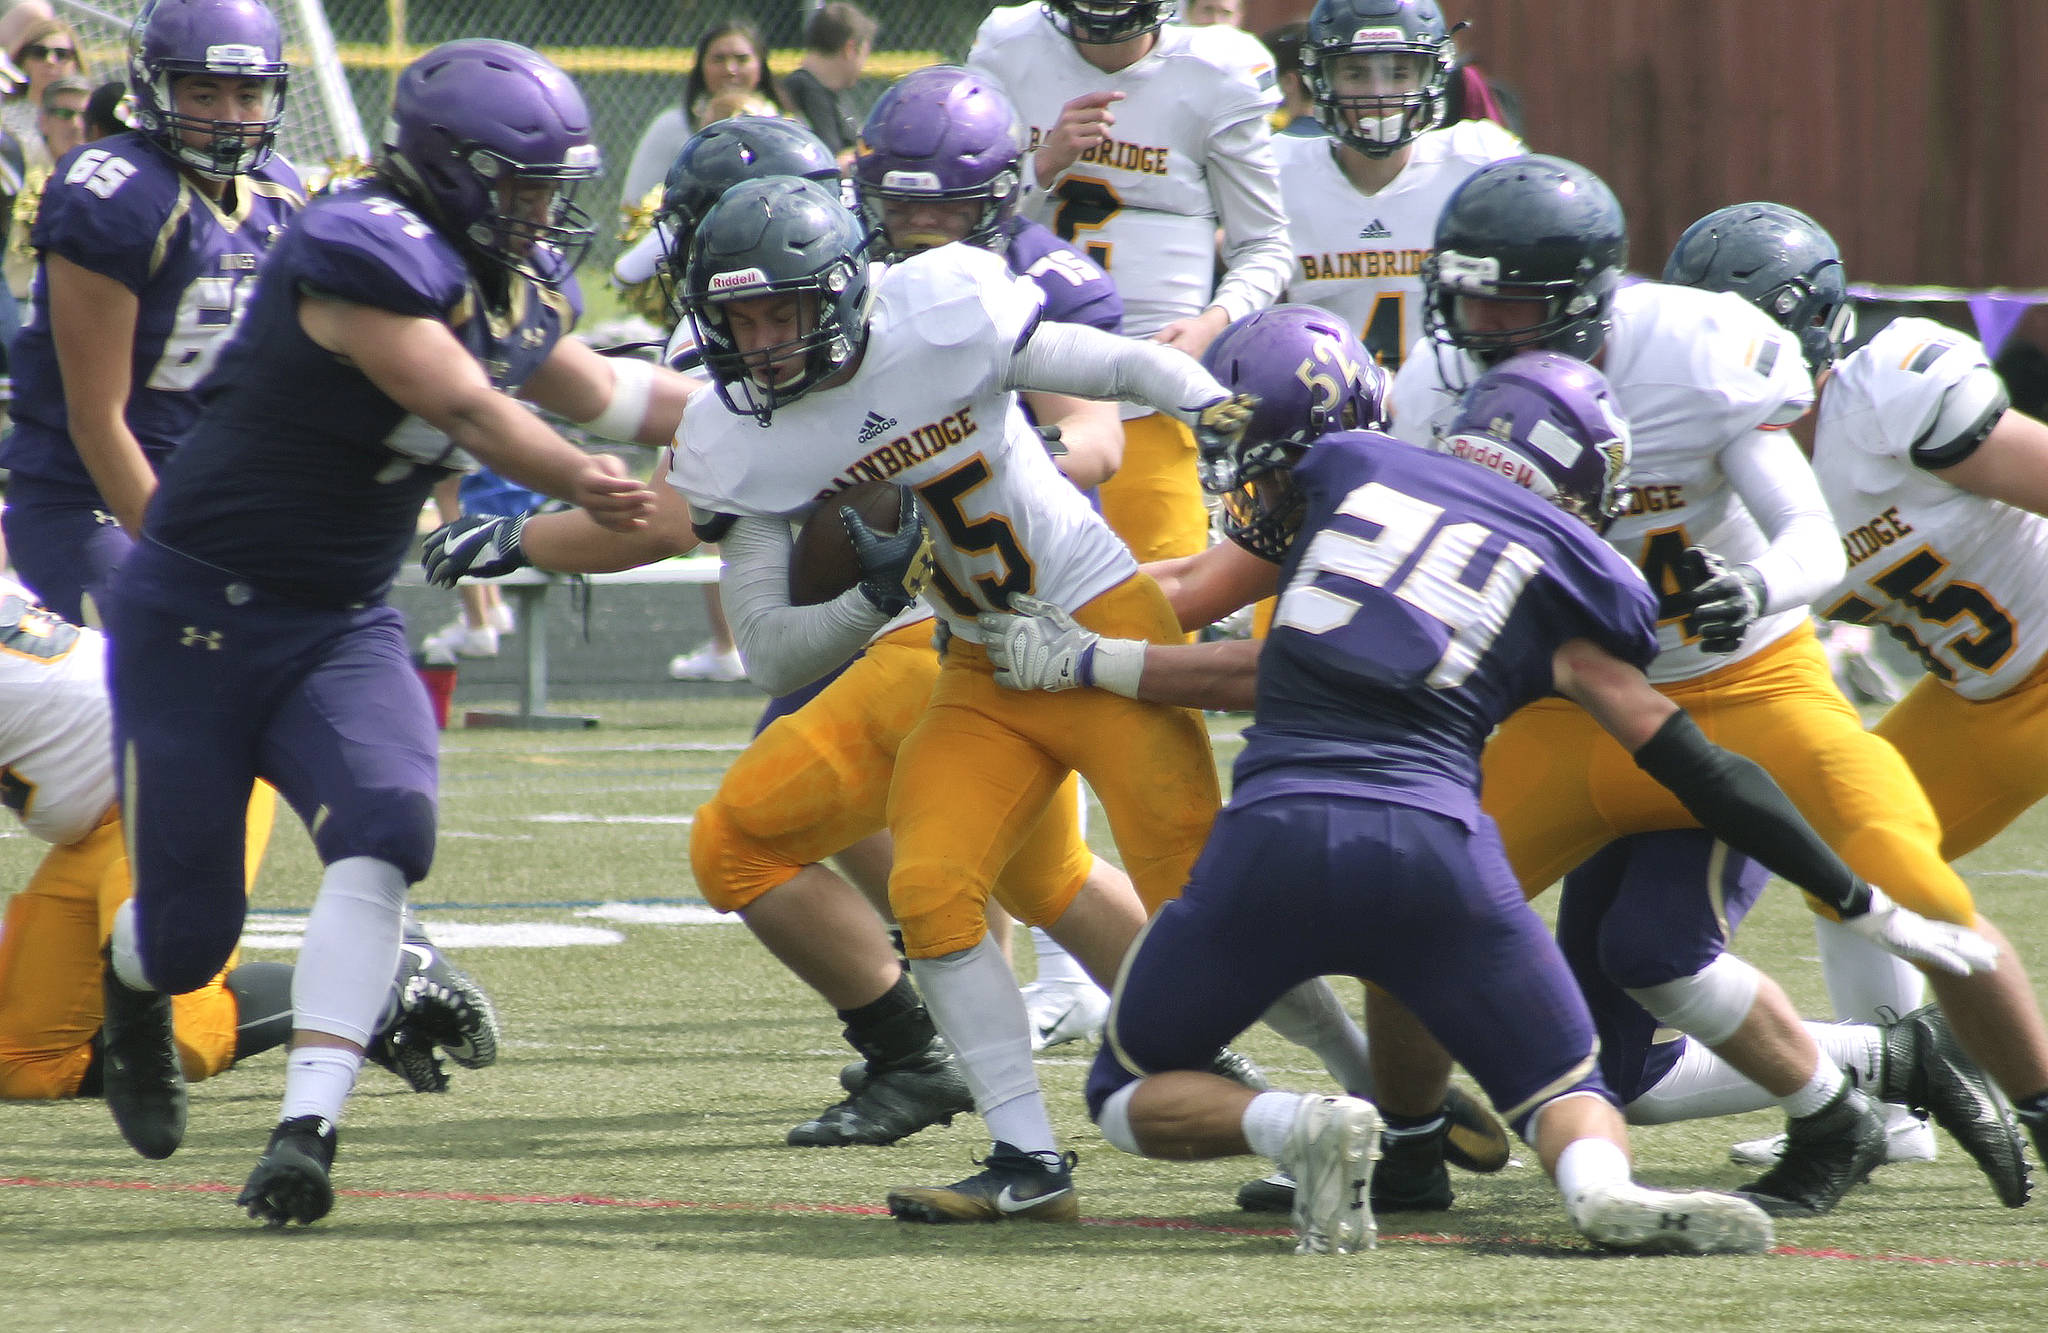 Bainbridge running back Alex Ledbetter tries to break away from the pile during the Spartans’ 2018 opener against North Kitsap. (File photo)